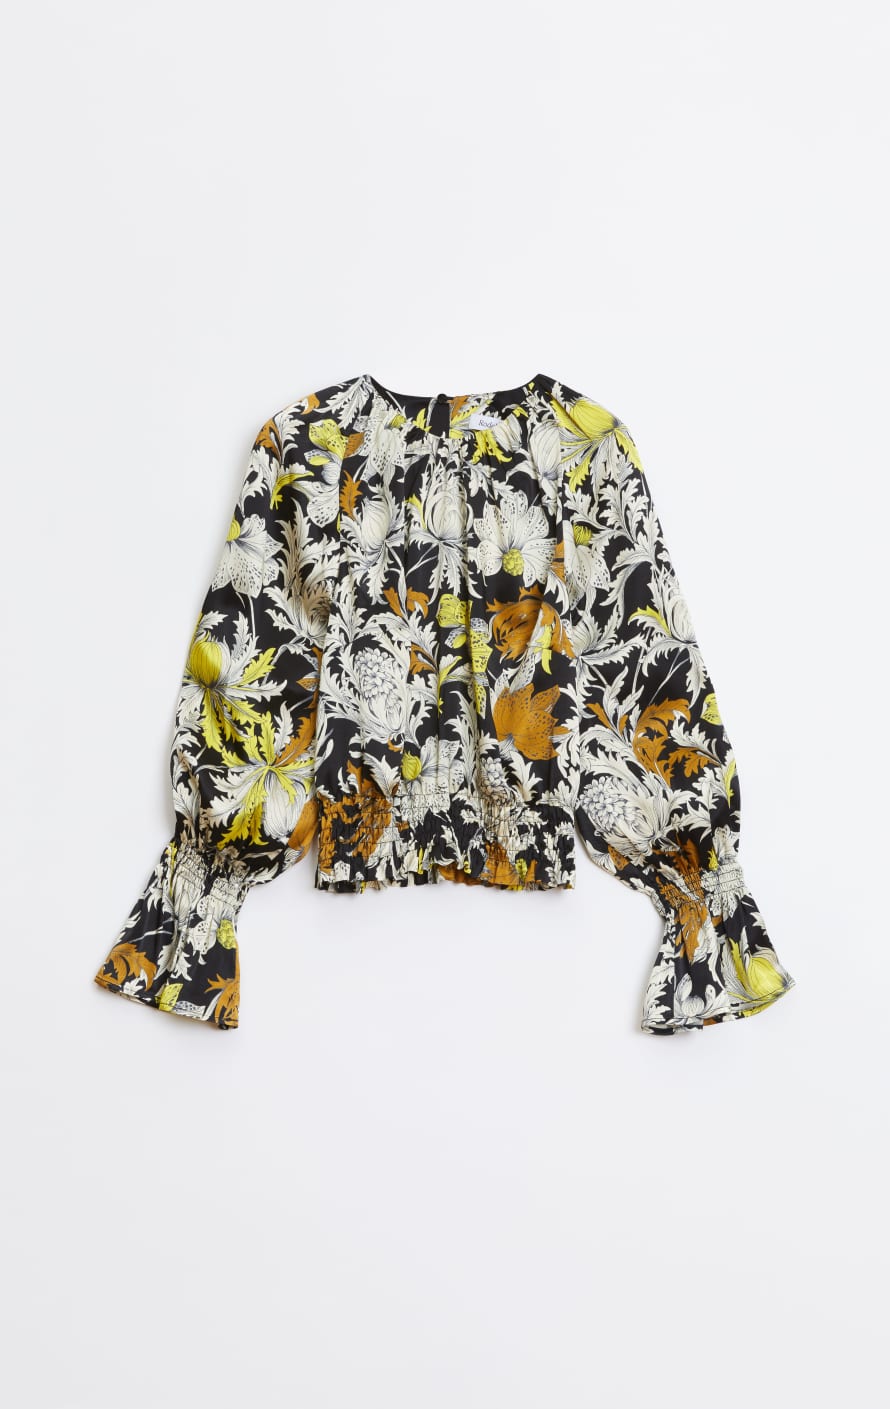 Rodebjer Adania Thistle Blouse